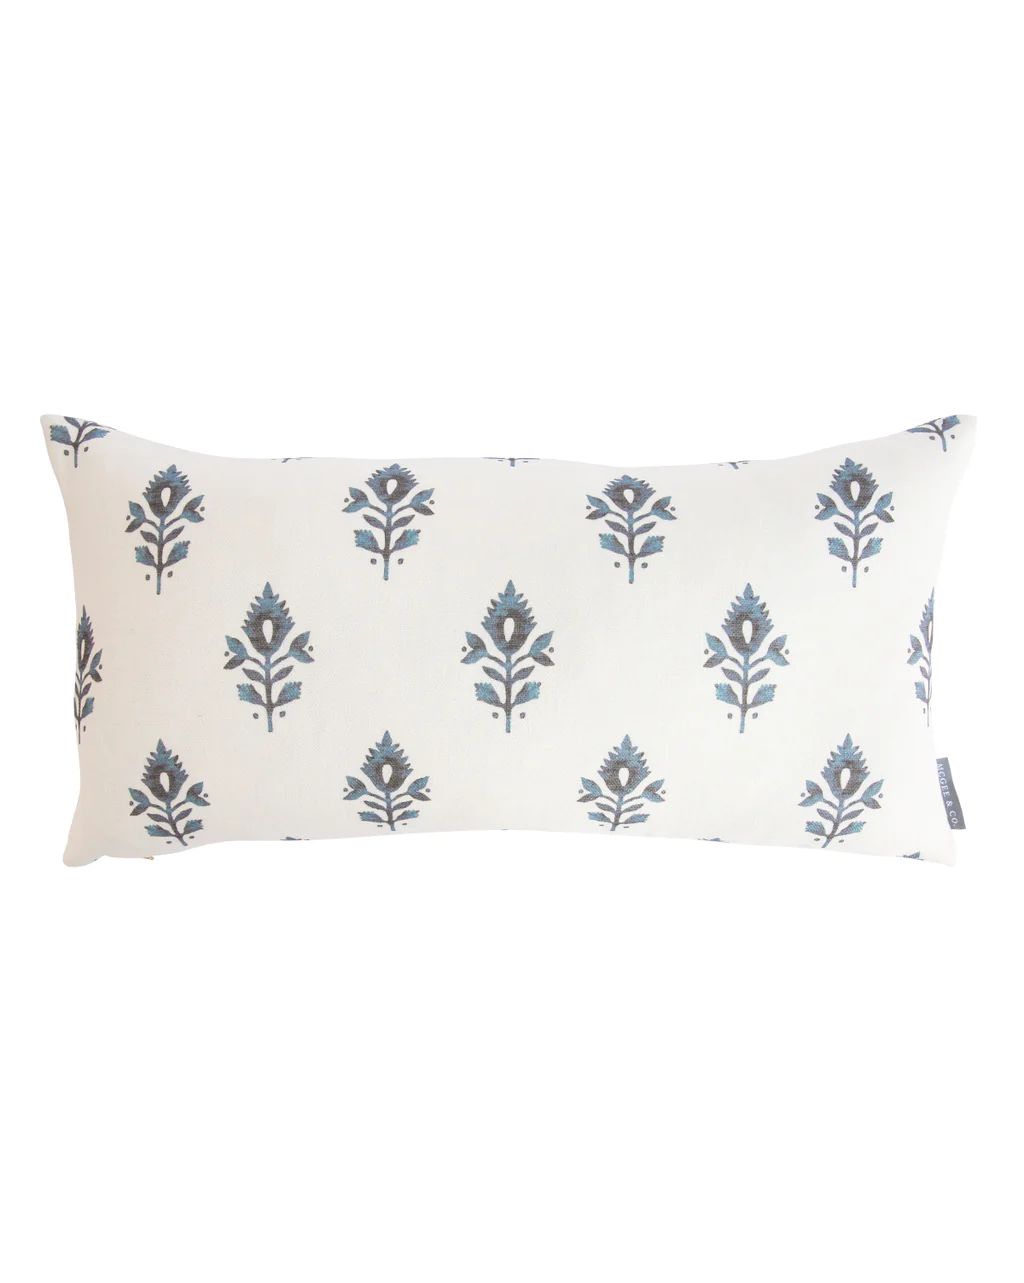 Addison Block Print Pillow Cover | McGee & Co.